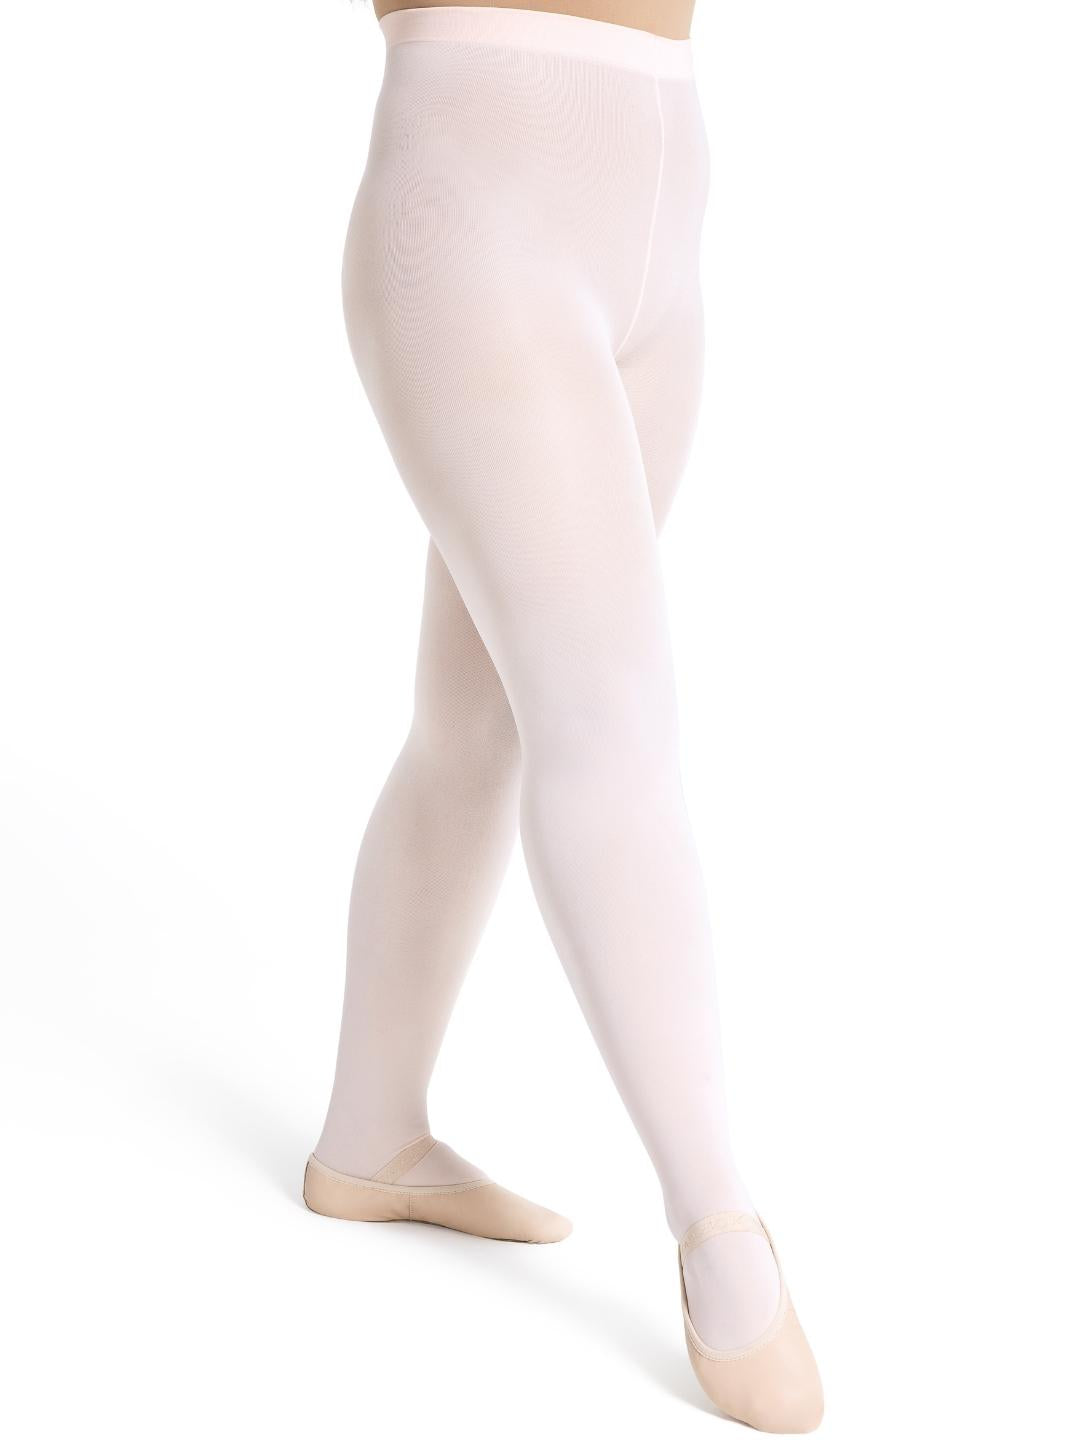 Capezio tights colors — swatches or comparisons? Color help needed! :  r/BALLET